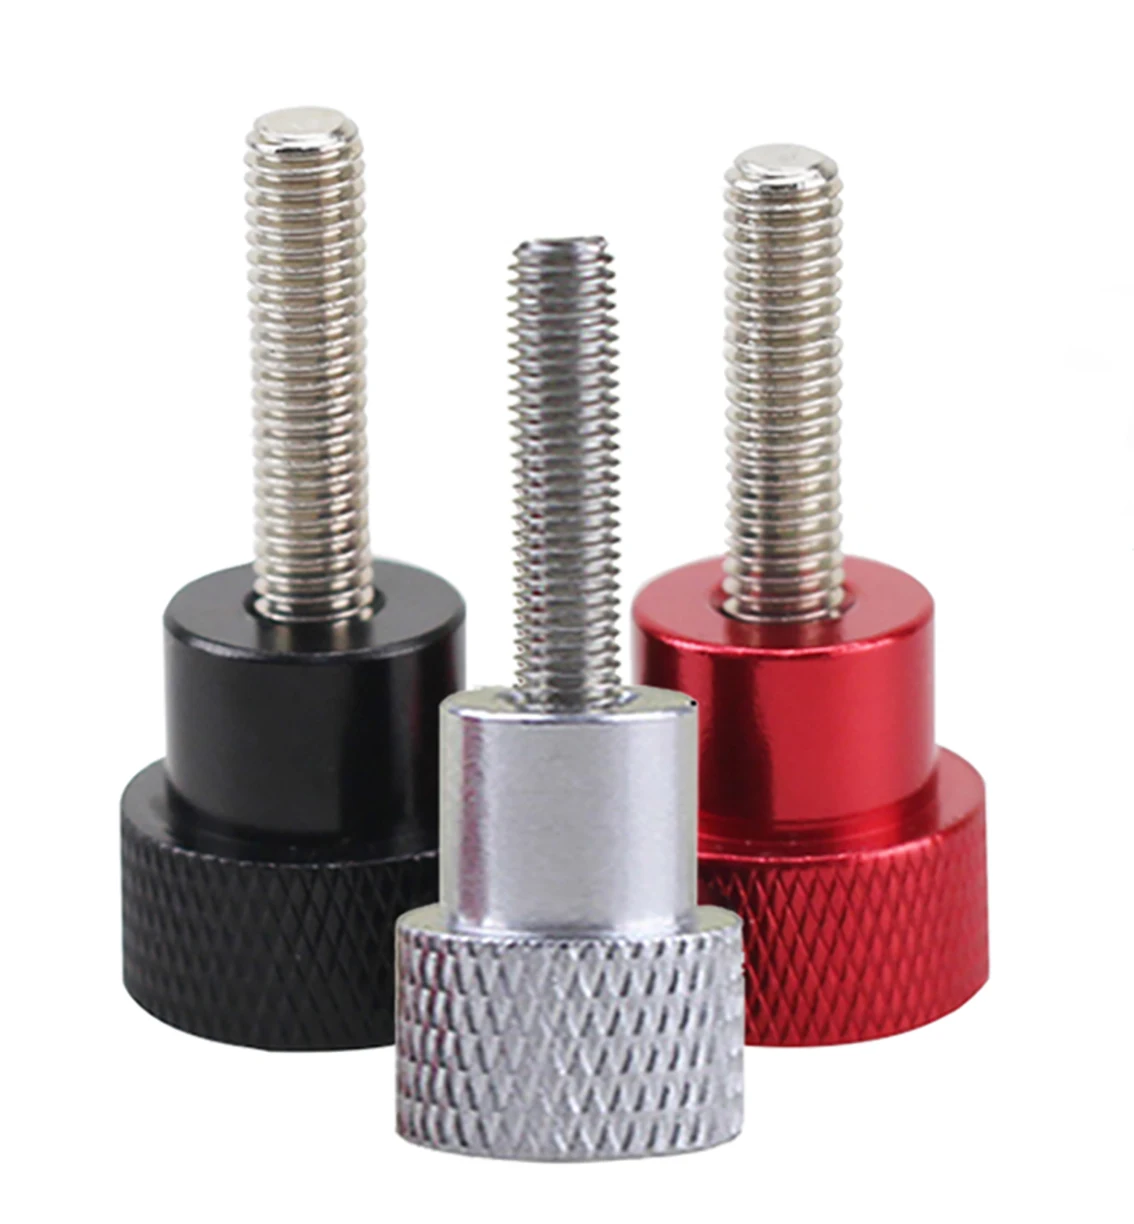 M10 For Model Details about   Knurled Thumb High Type Nut Hand Grip Knobs Aluminum Alloy M2 